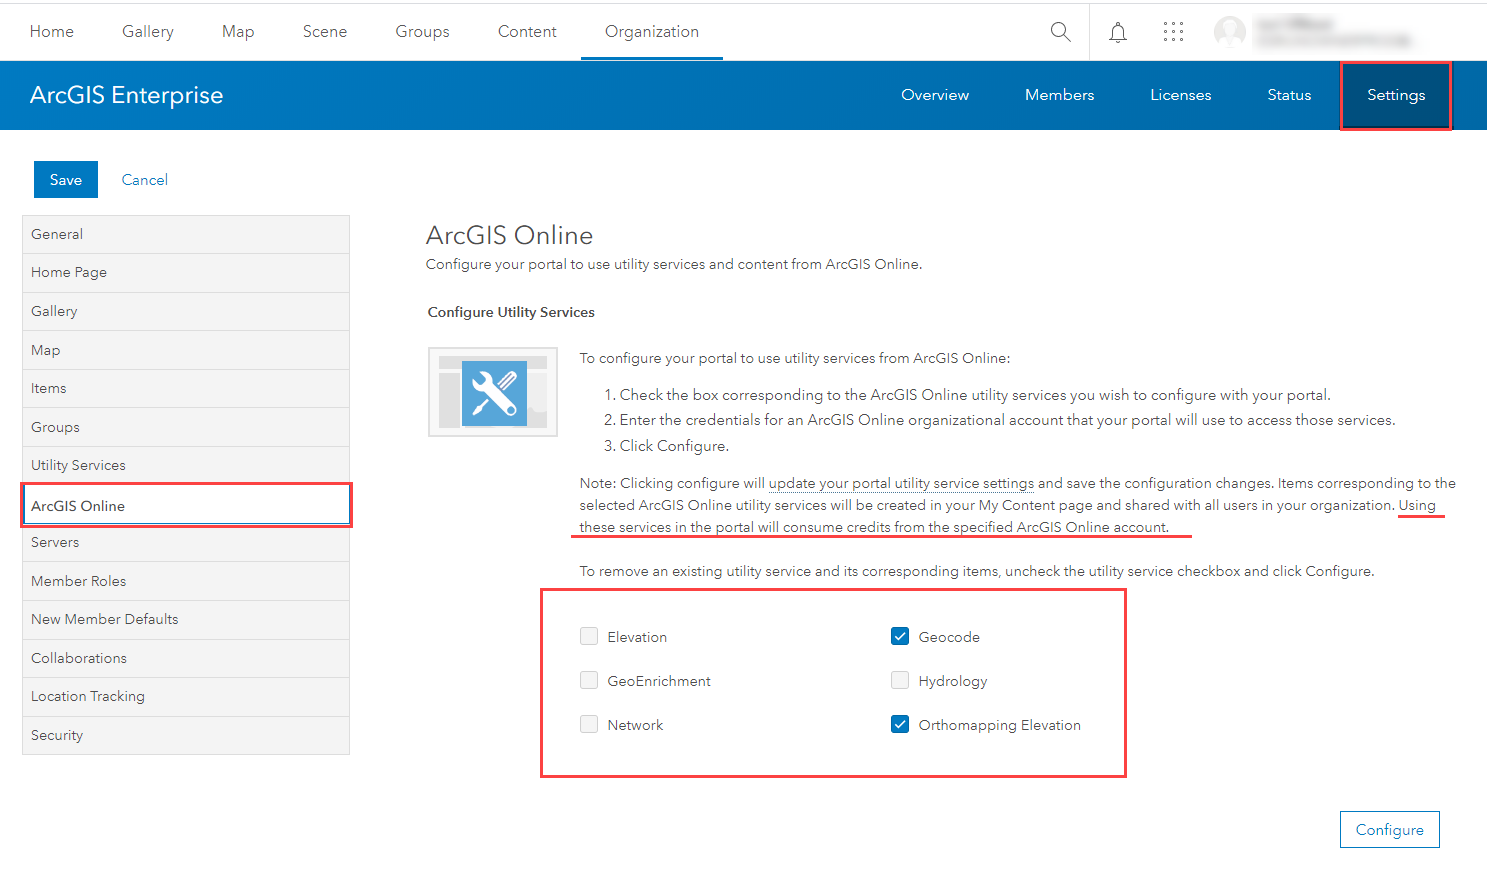 Image of utility service configuration for ArcGIS Online in ArcGIS Enterprise